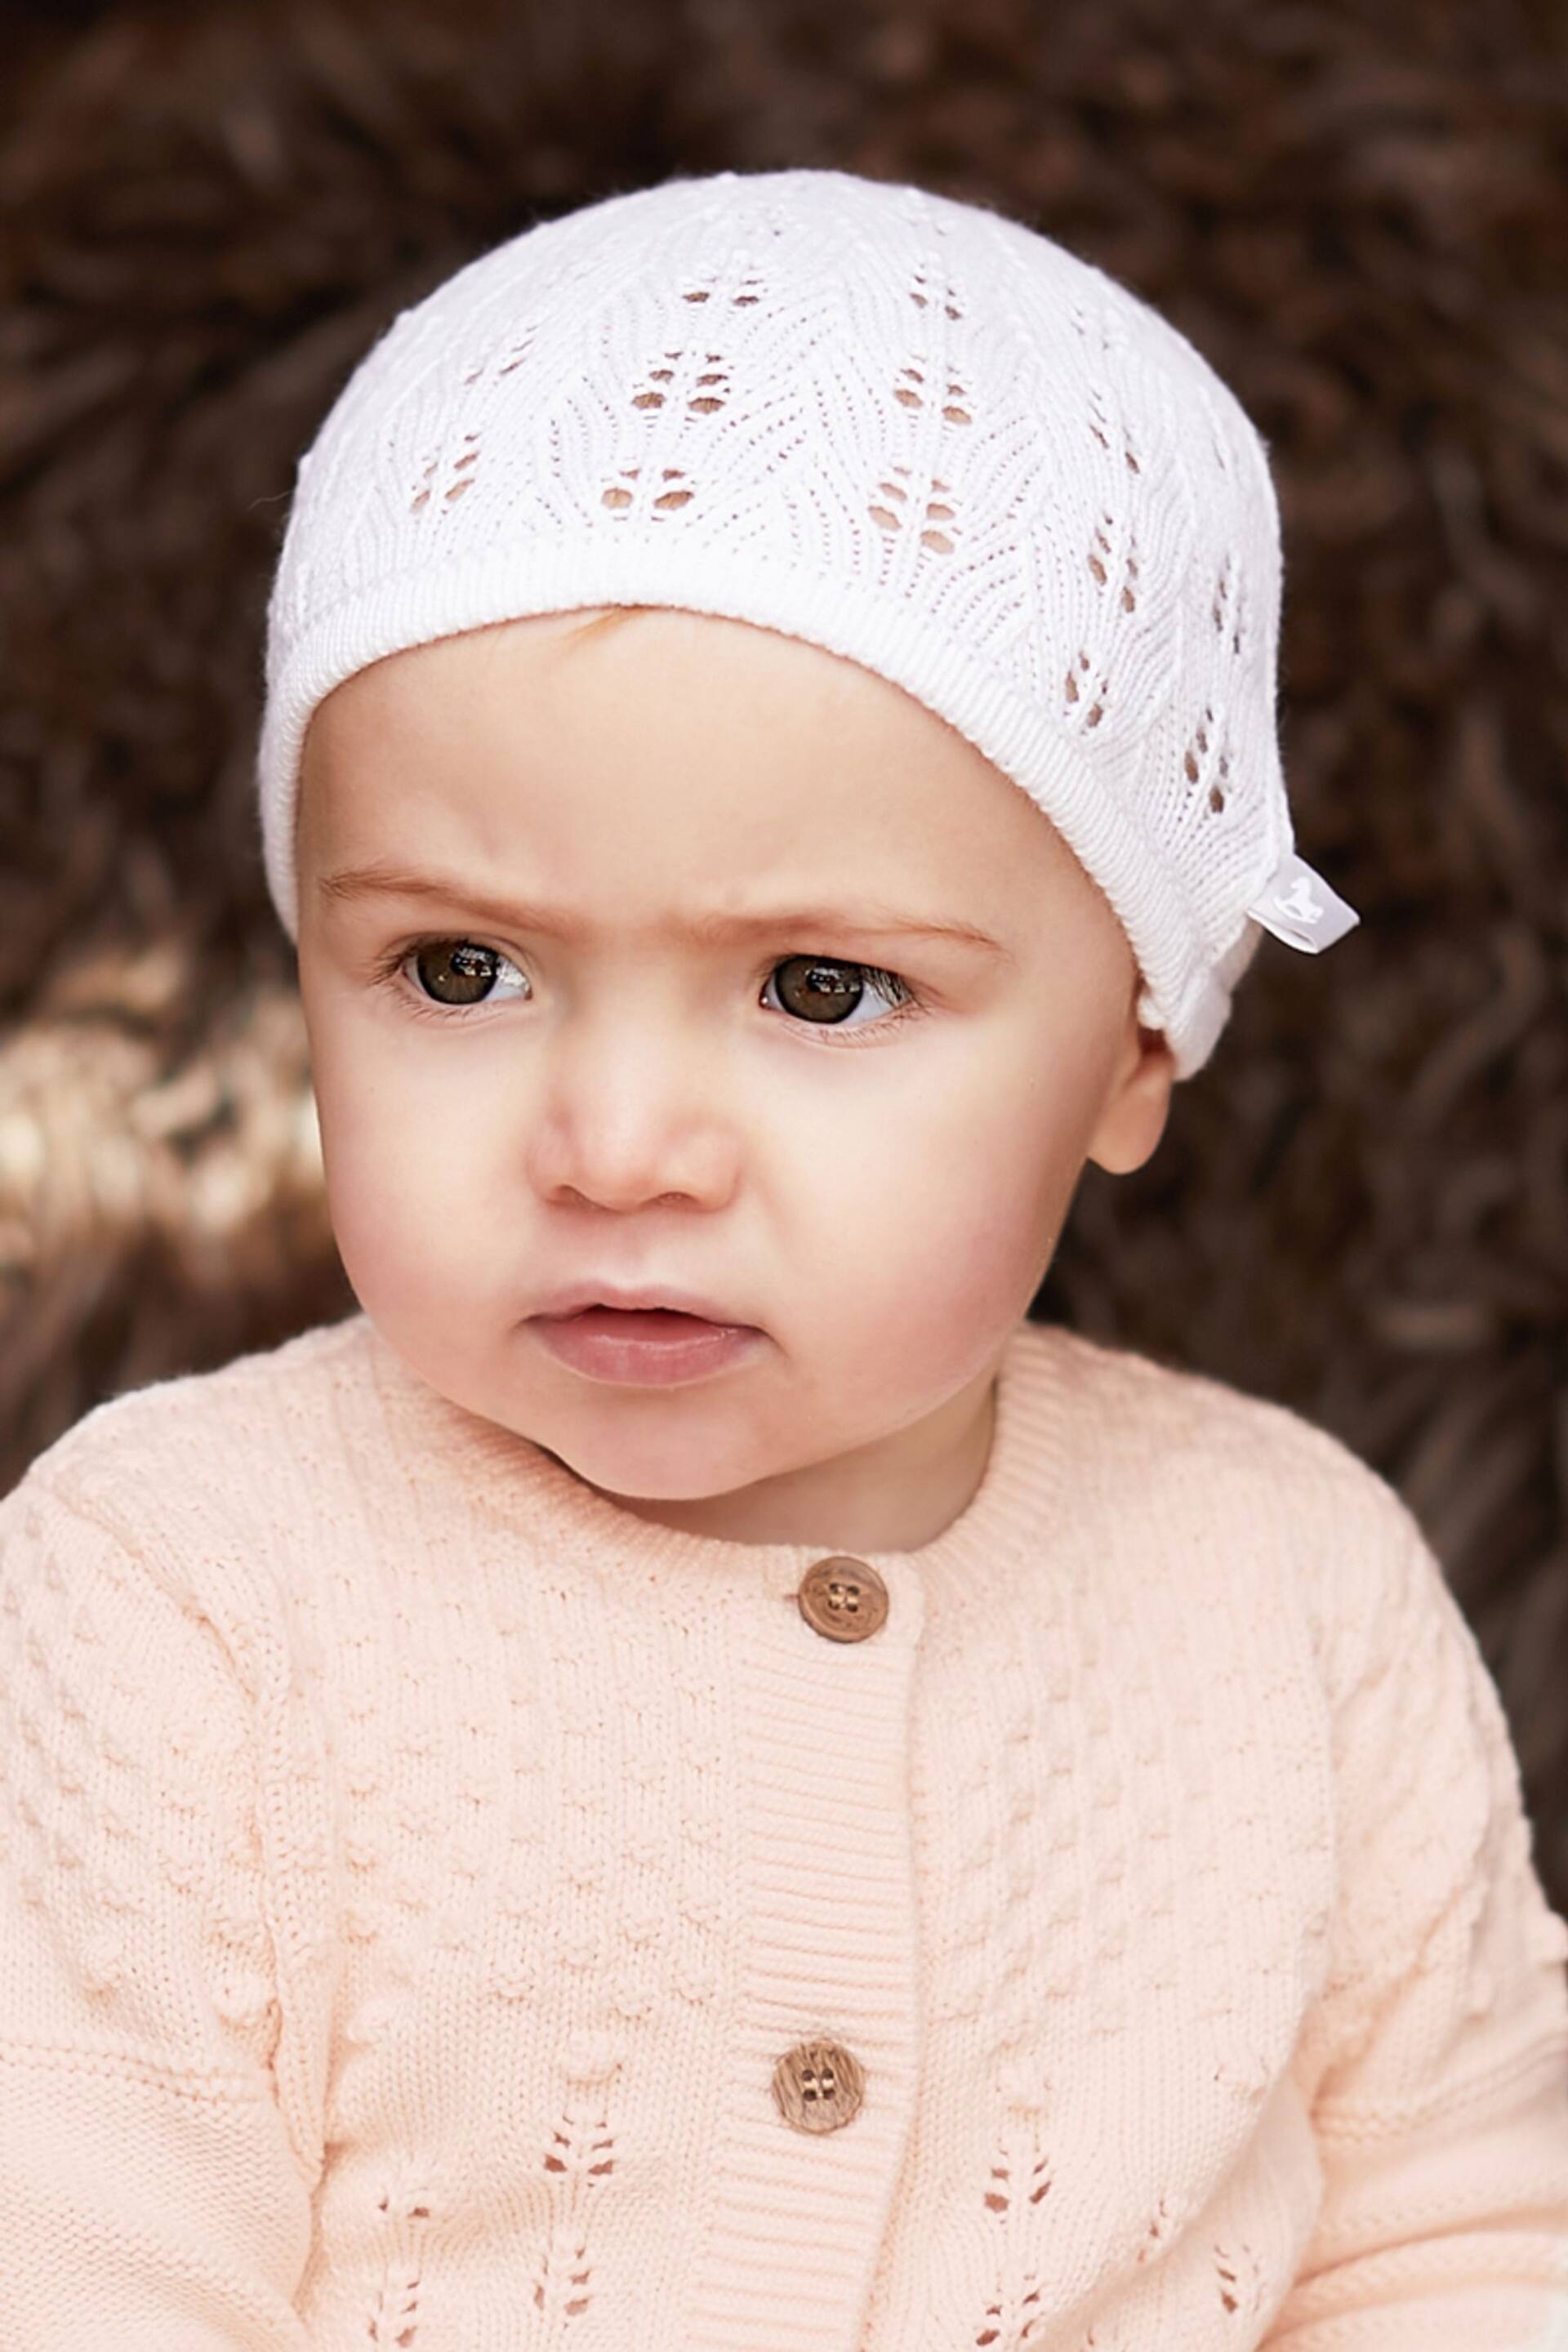 The Little Tailor Cotton Pointelle Knitted Baby Hat - Image 1 of 3